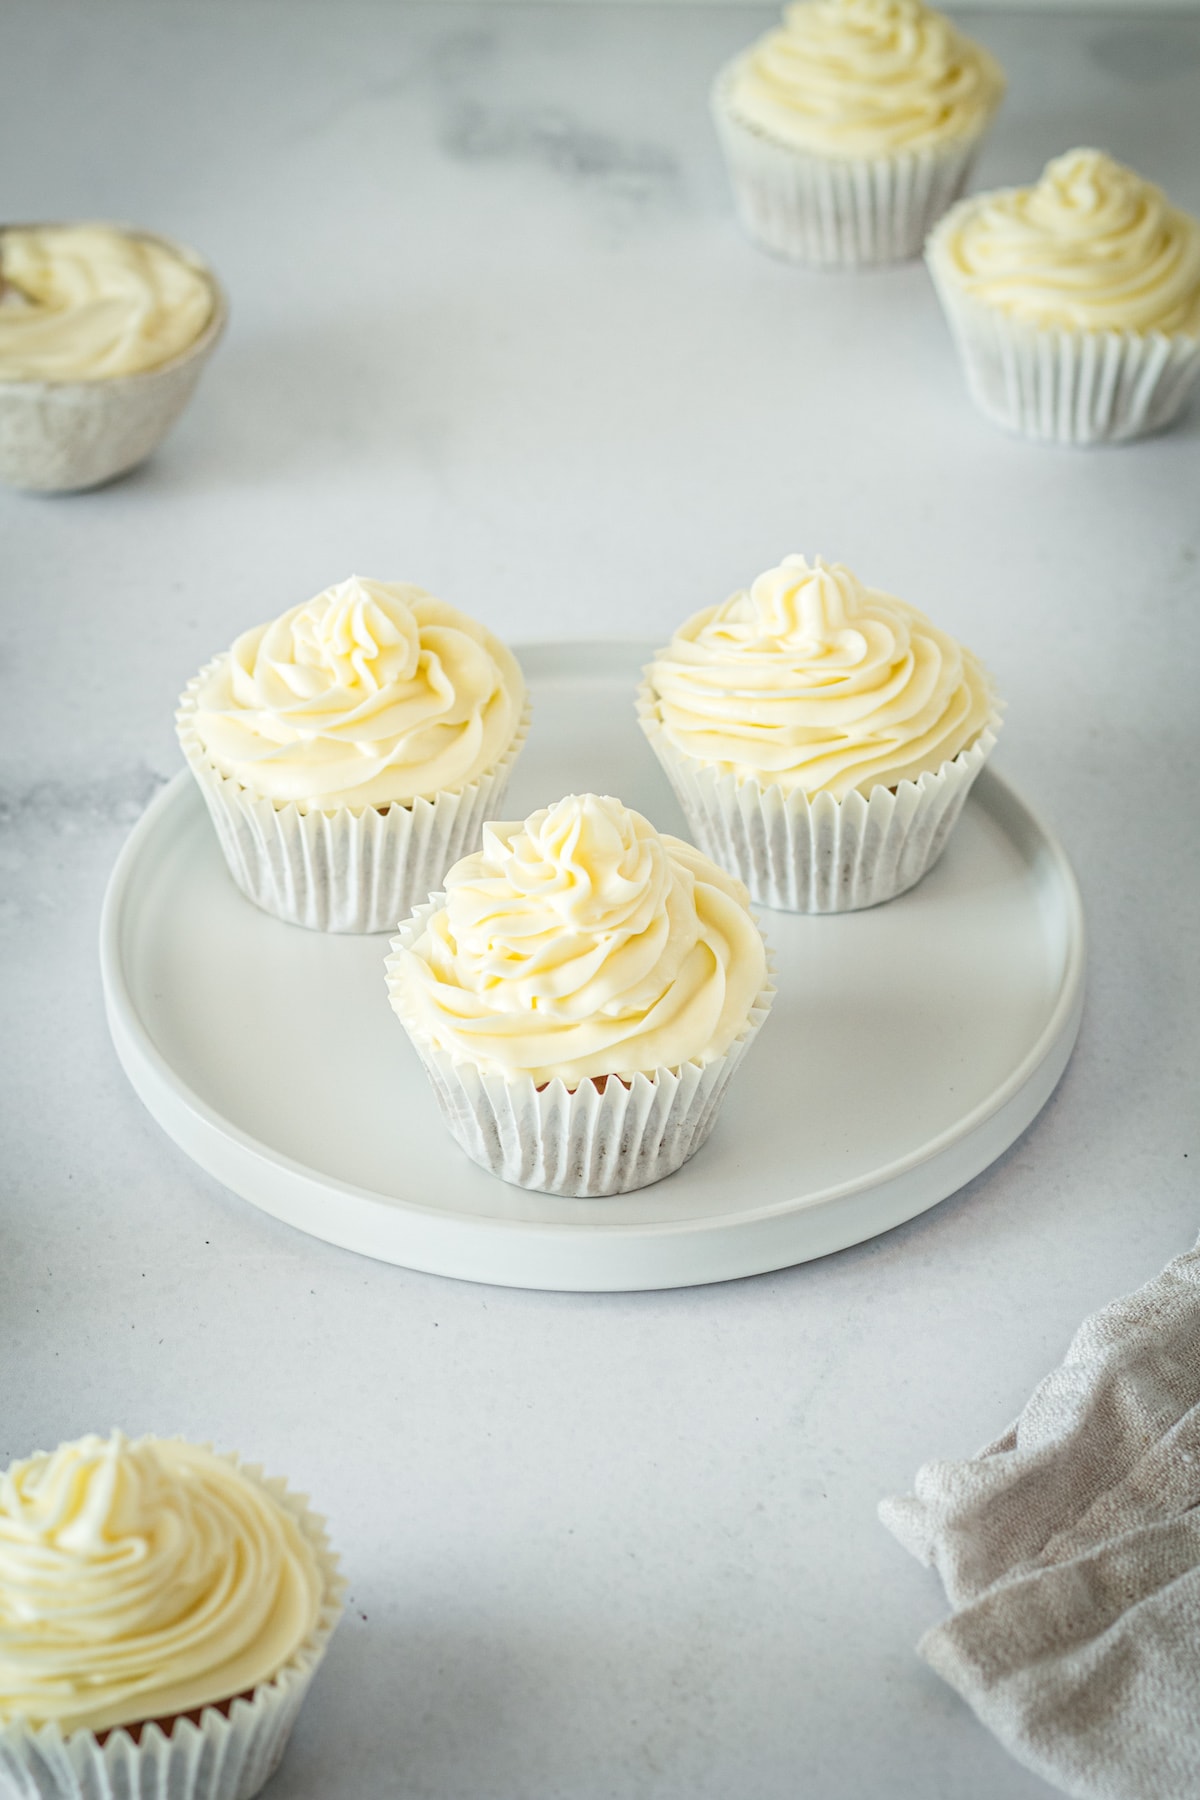 Three gingerbread cupcakes in wrappers on white plate